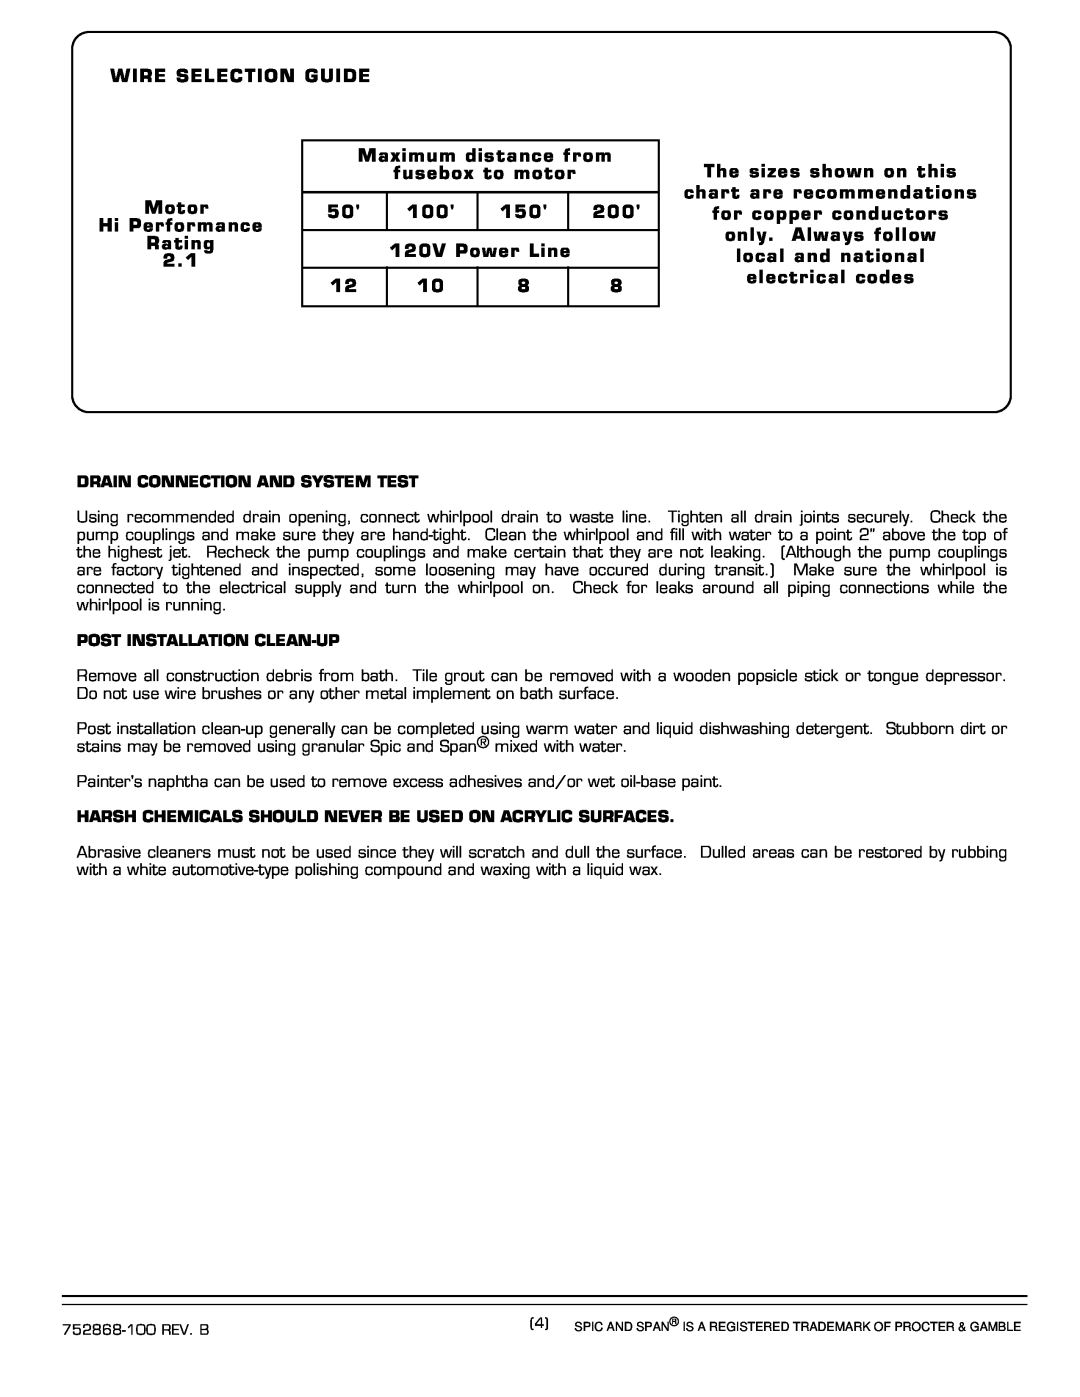 American Standard 7242E installation instructions Wire Selection Guide 